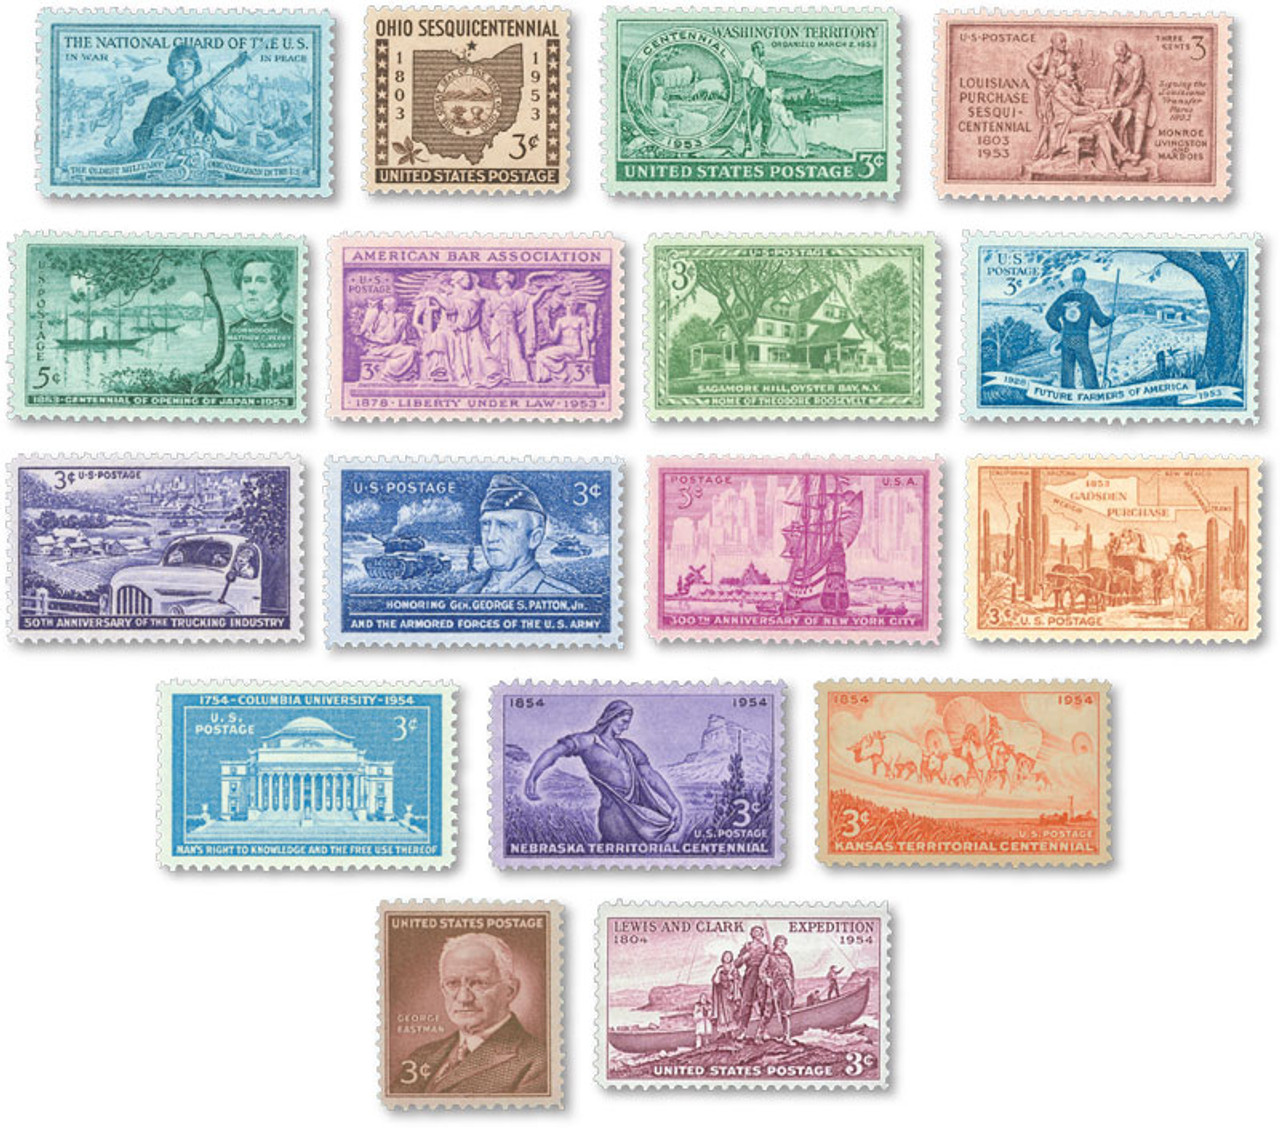 1953 Complete Year SET MNH Vintage U.S. Postage Stamps With 12 Free Mounts!